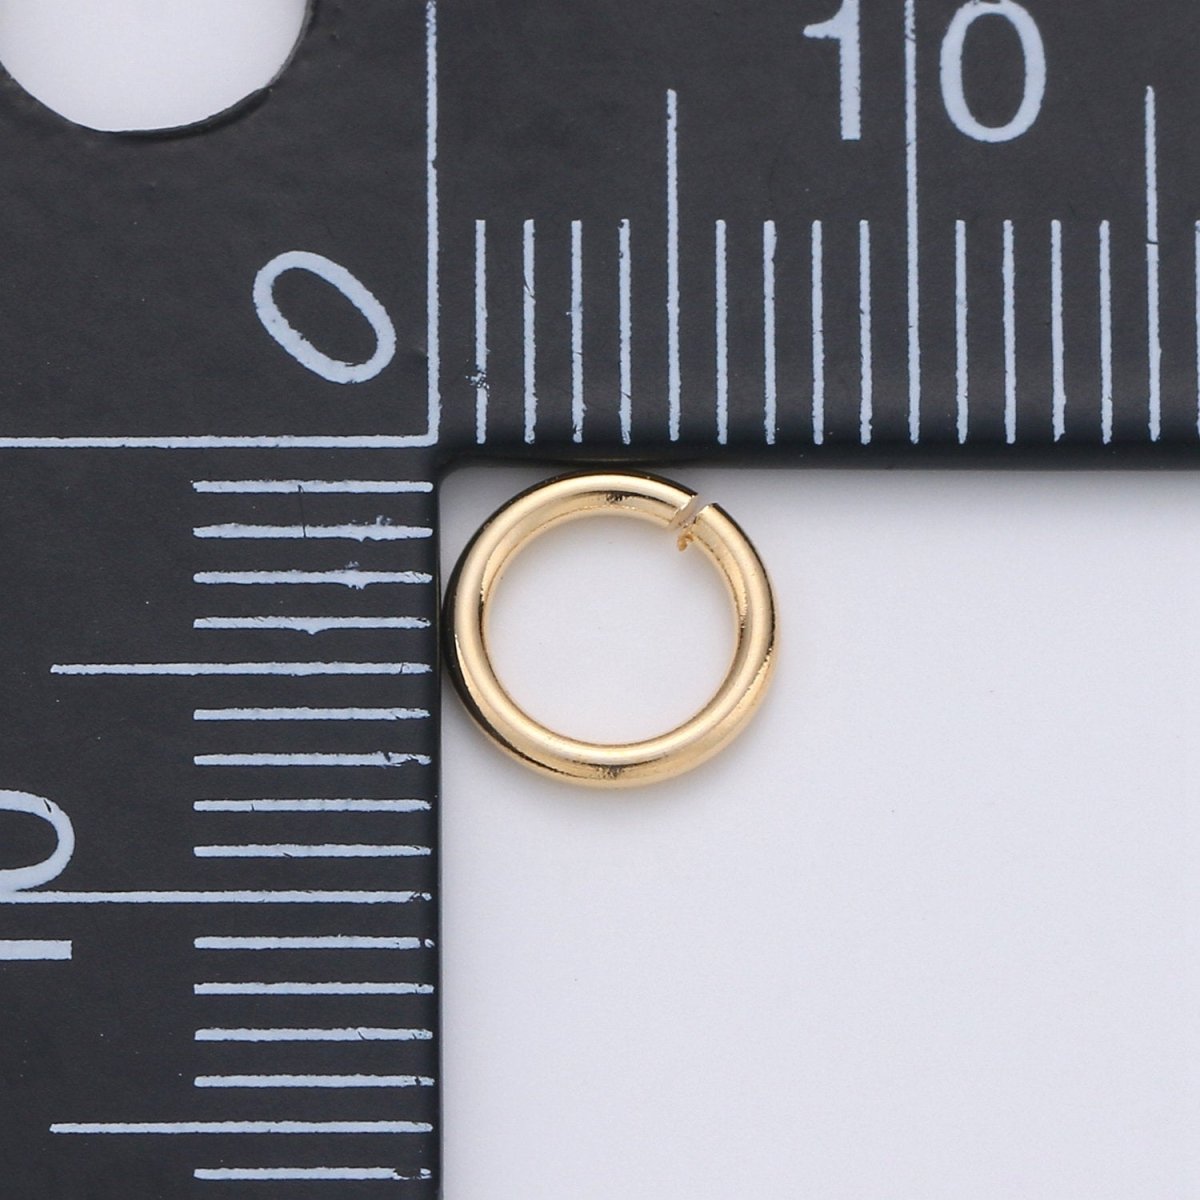 Open Jump Ring Real Gold Plated Jump Ring 4mm, 7mm with 20 gauge / 0 ...